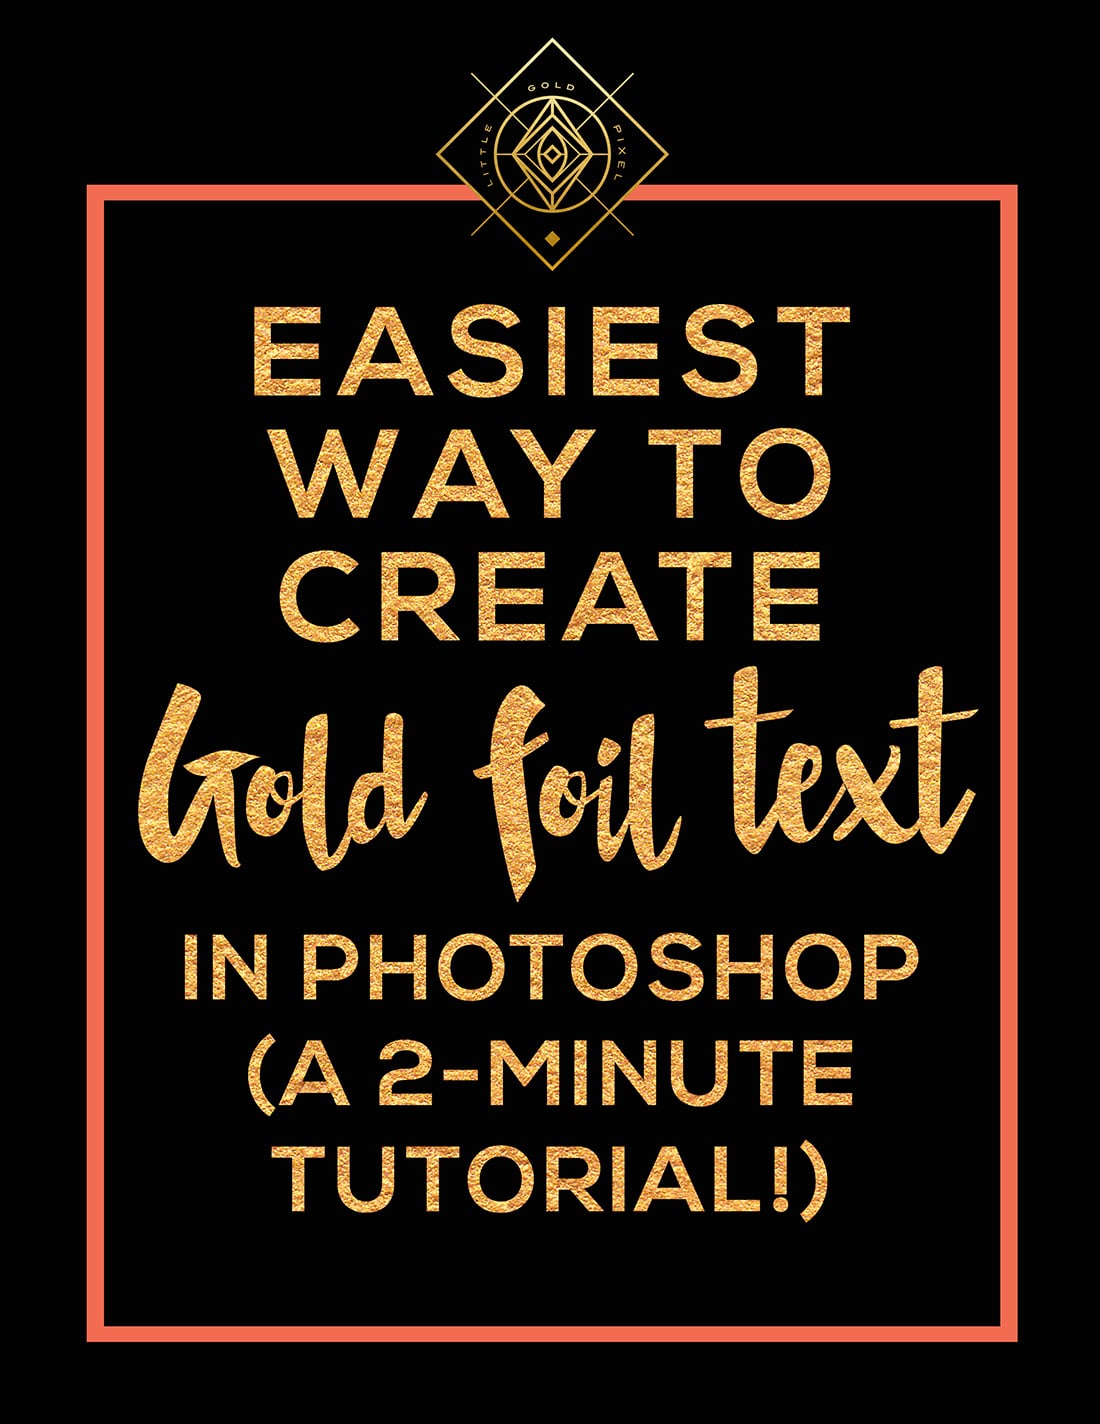 The Easiest Way to Create Gold Foil Text in Photoshop • Little Gold Pixel